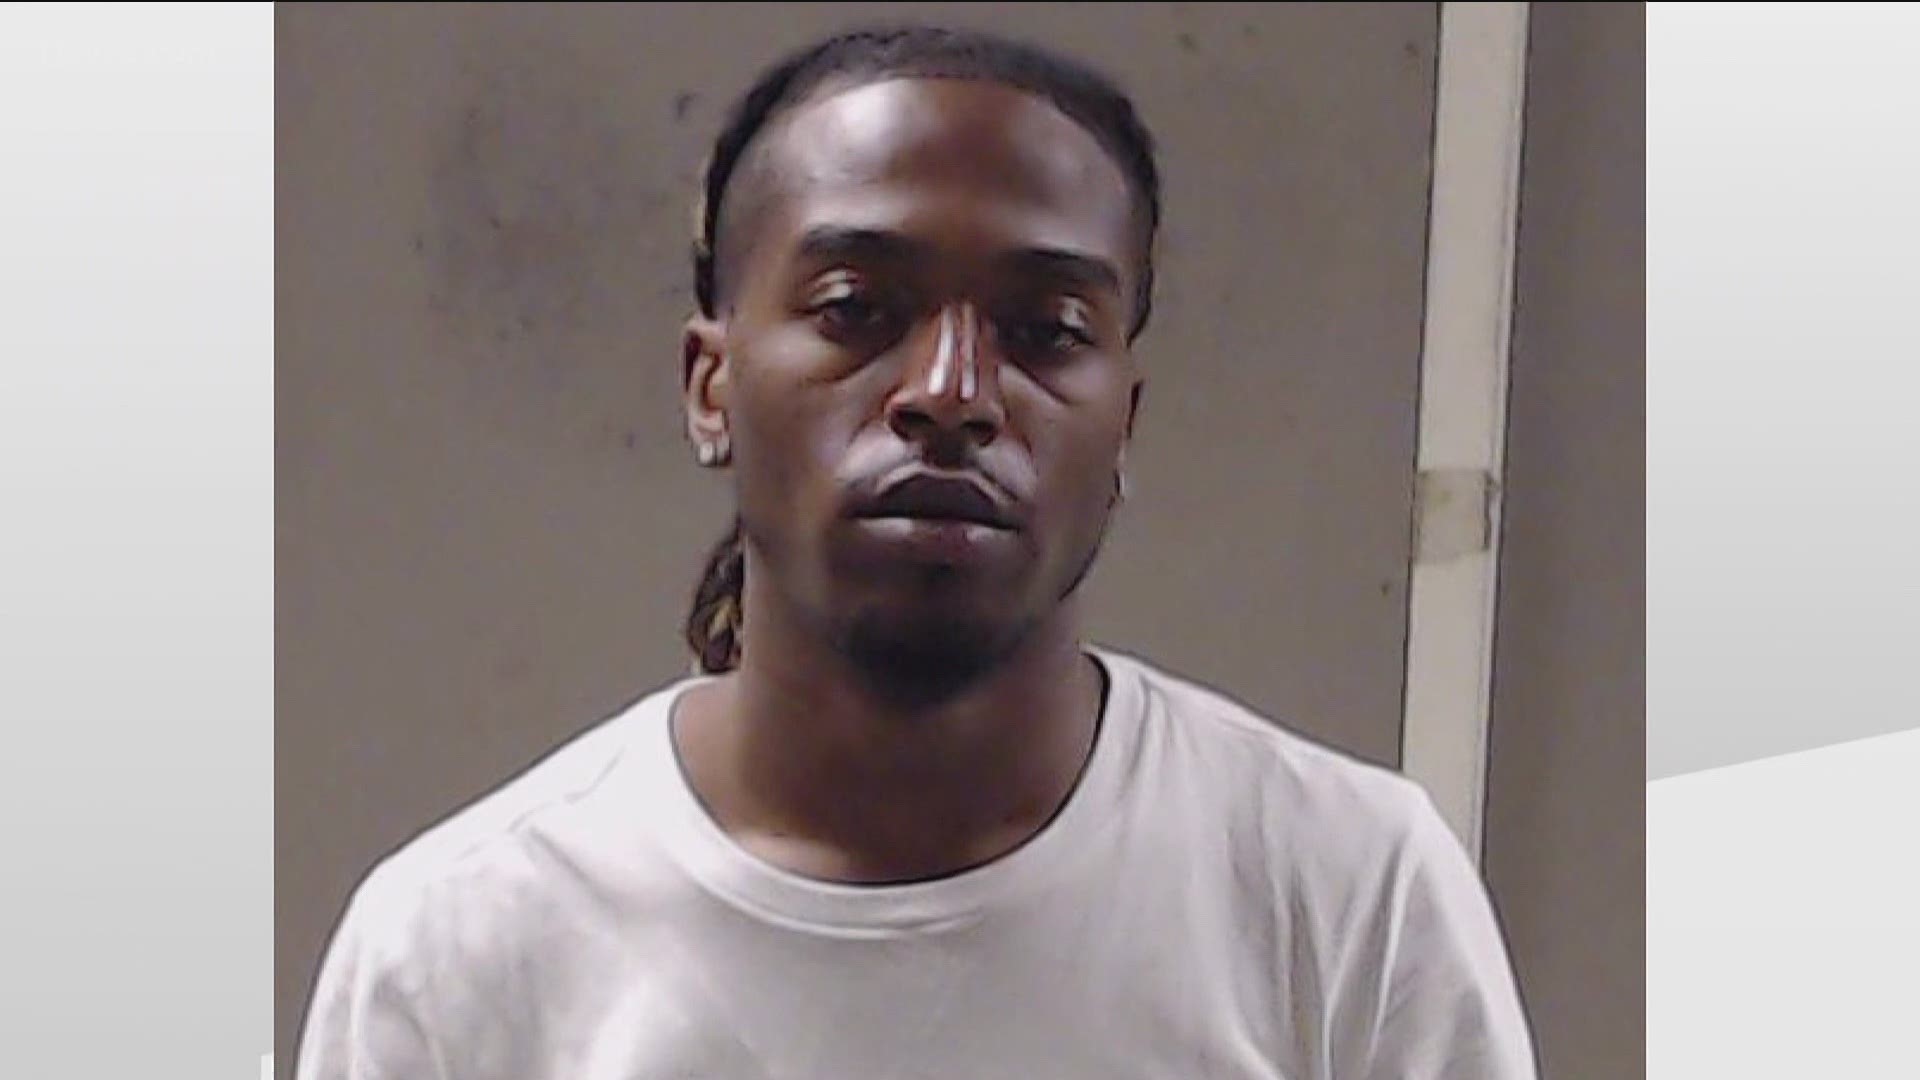 Bryan Rhoden is the suspect facing charges in the crime.